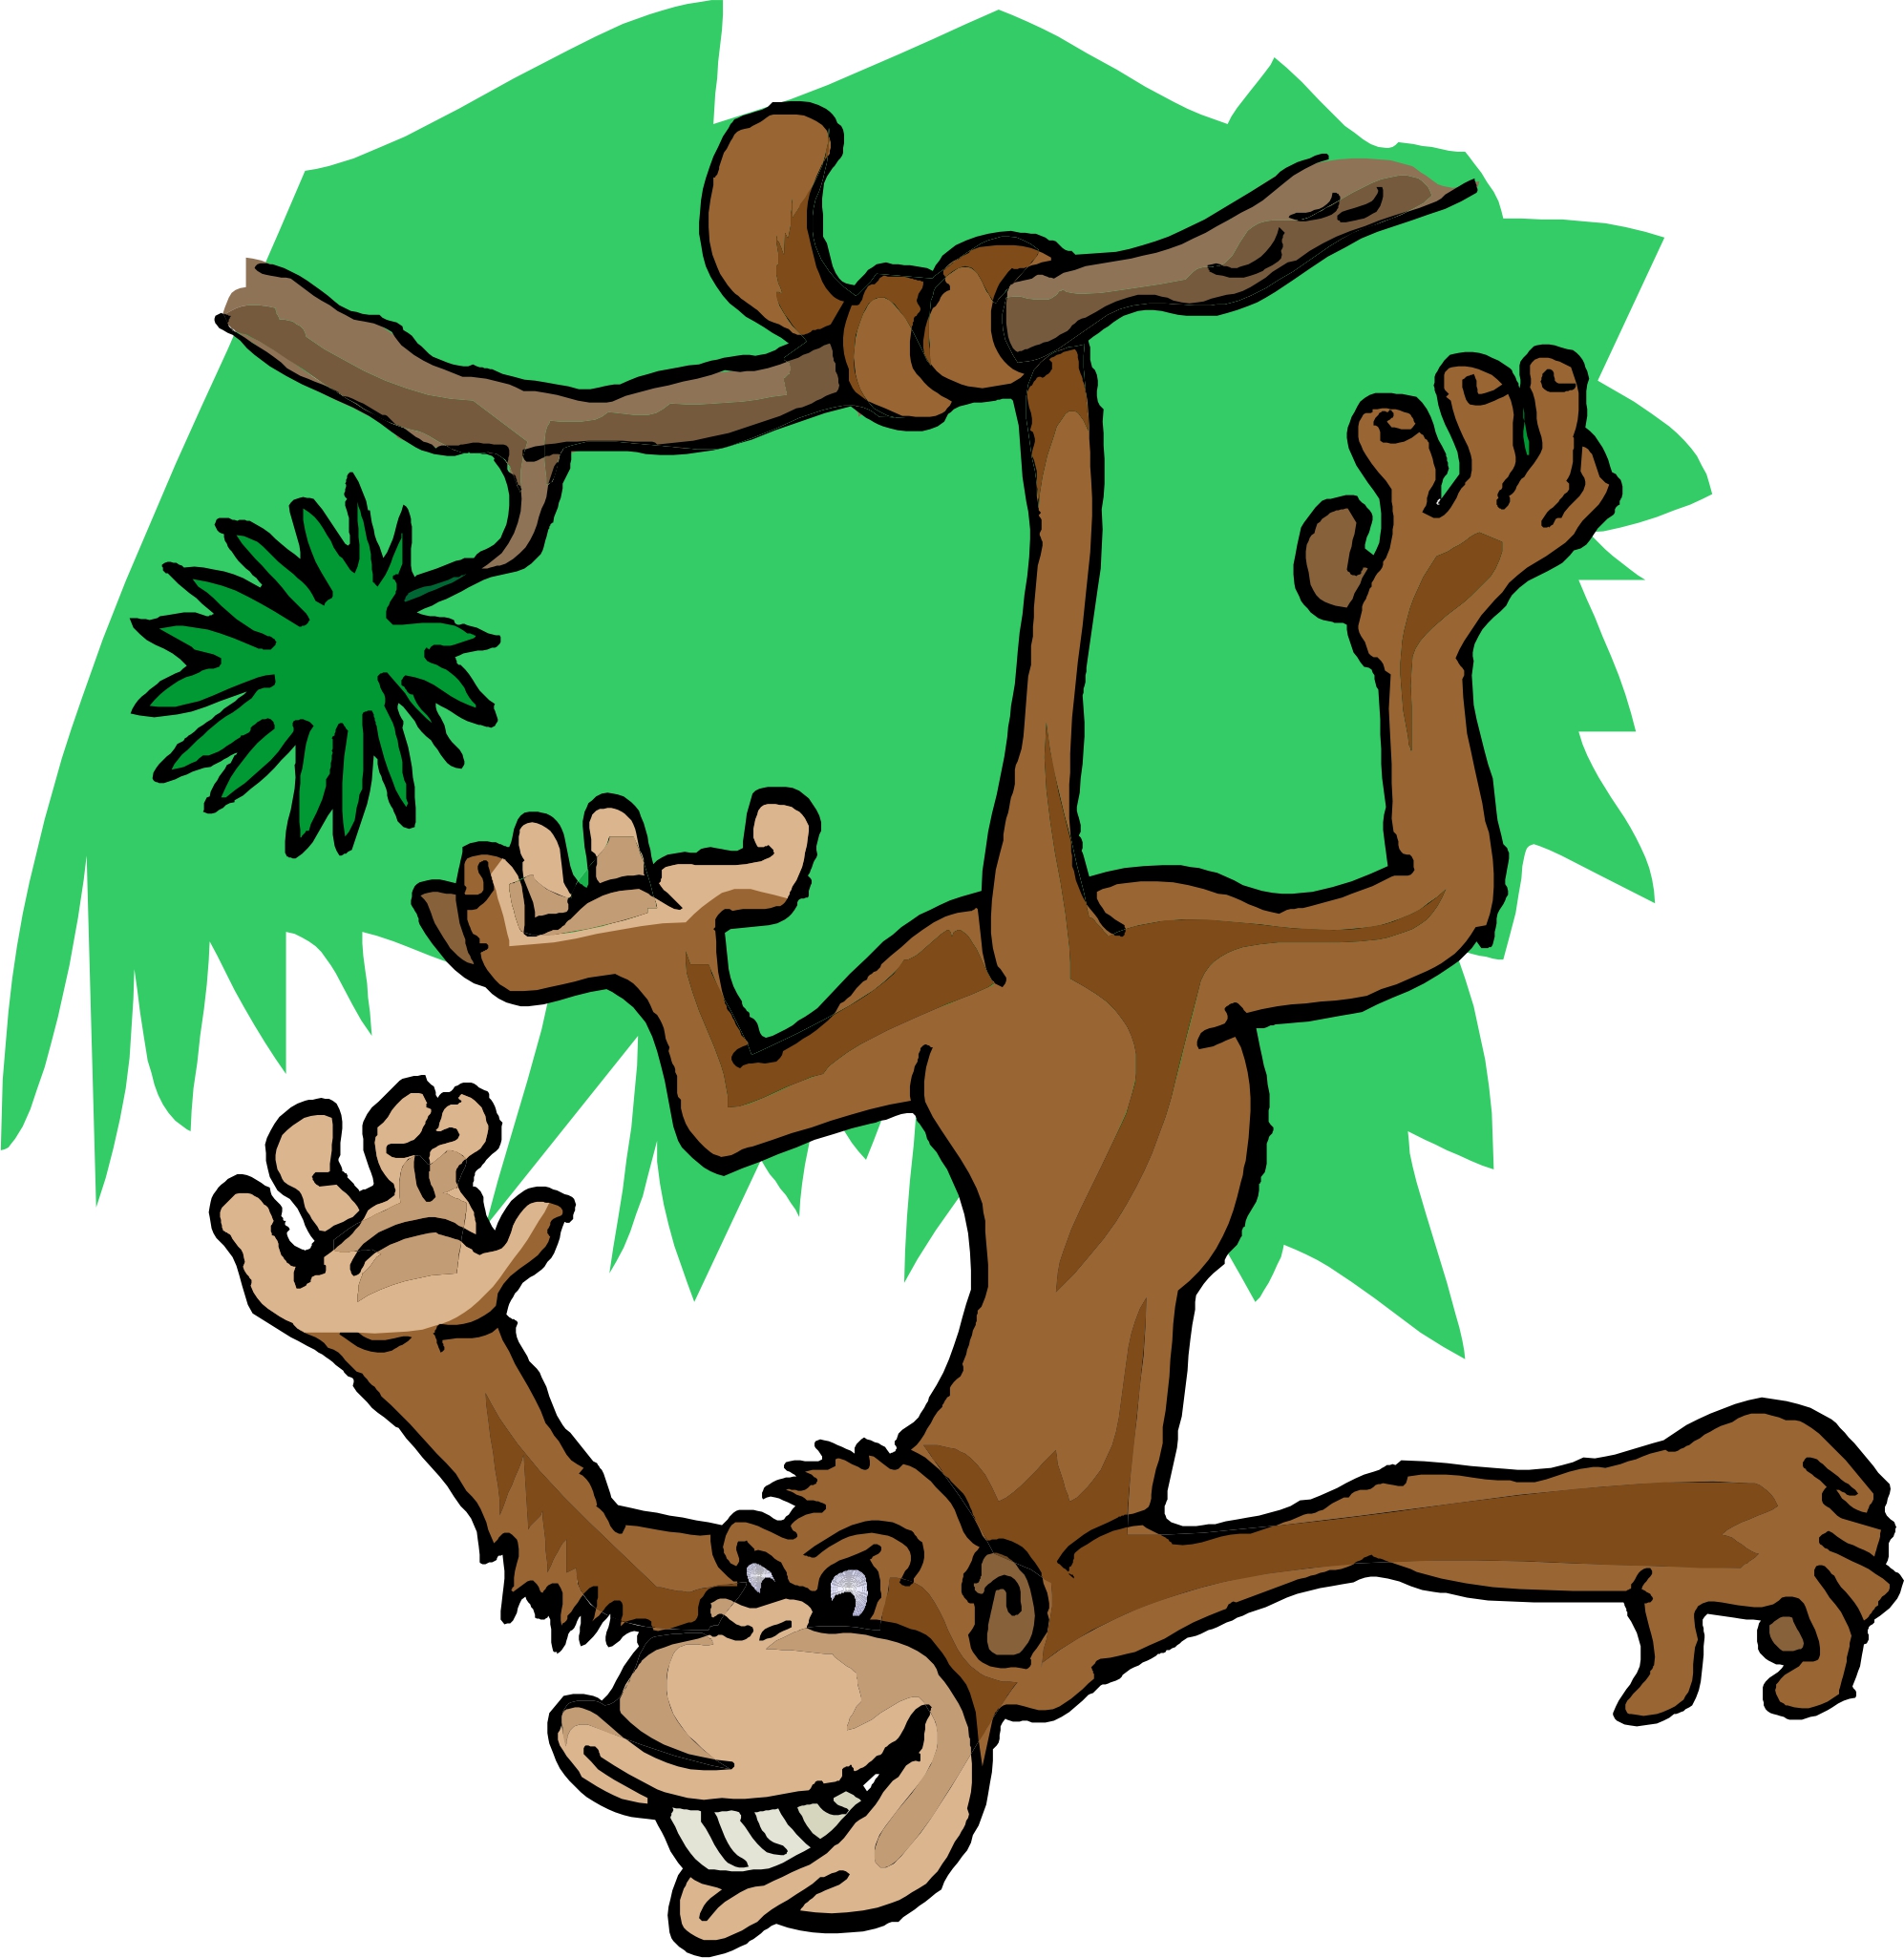 Animated Tree Clip Art - ClipArt Best